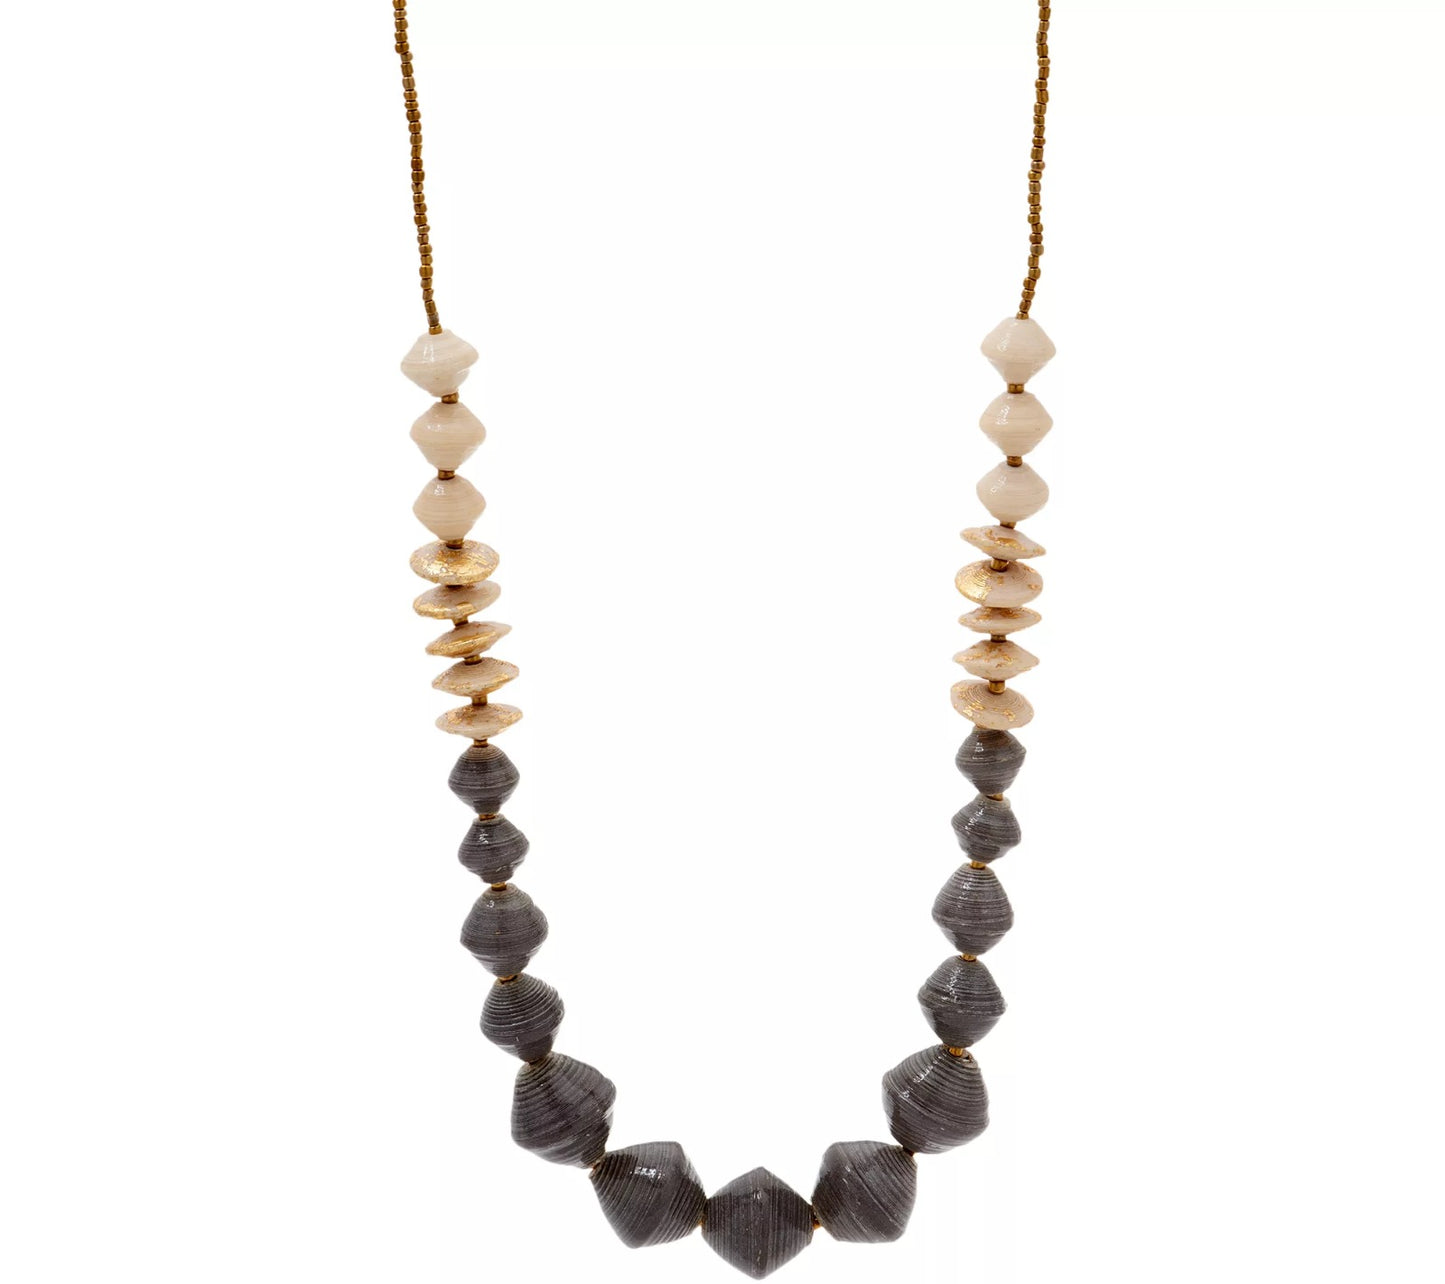 31 Bits GREY / CREAM wrapped paper, Glass Beads Necklace 33-3/4" GoldTone